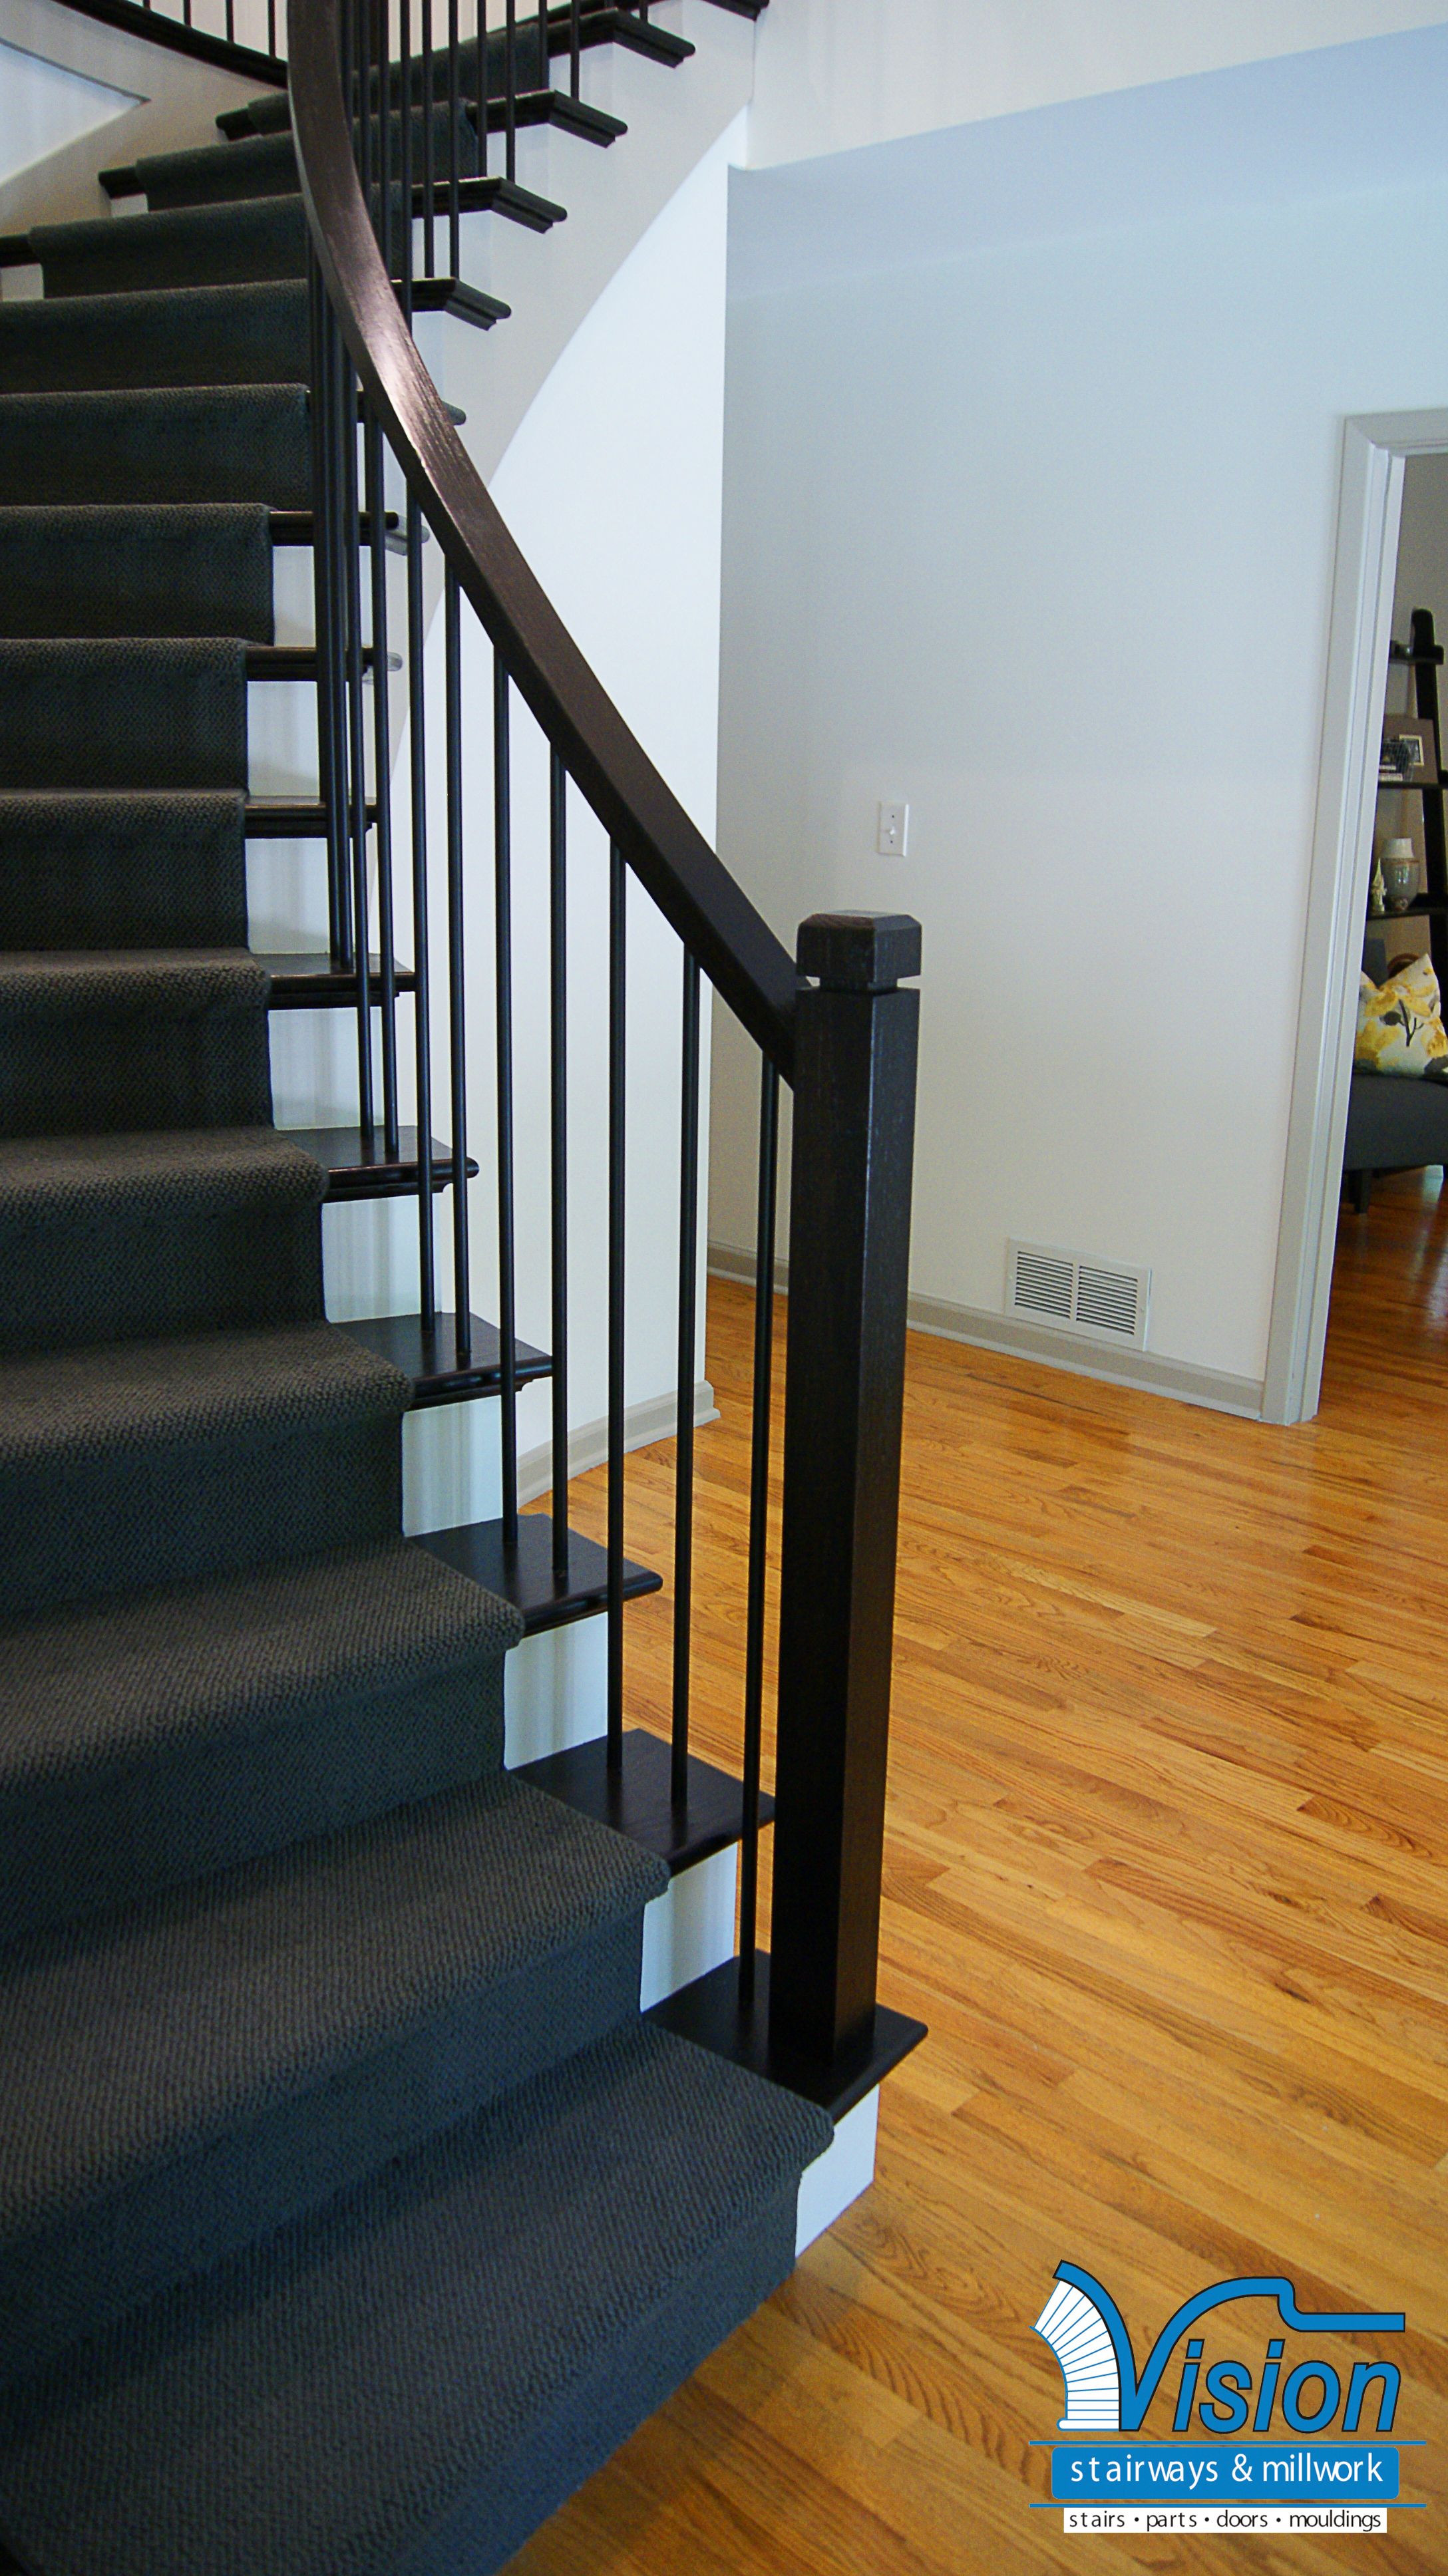 Hardwood Floor Refinishing Ottawa Of Curved Staircase with Iron Railing and Balusters with Ebony Stained Regarding Curved Staircase with Iron Railing and Balusters with Ebony Stained Wooden Newels and Return Treads